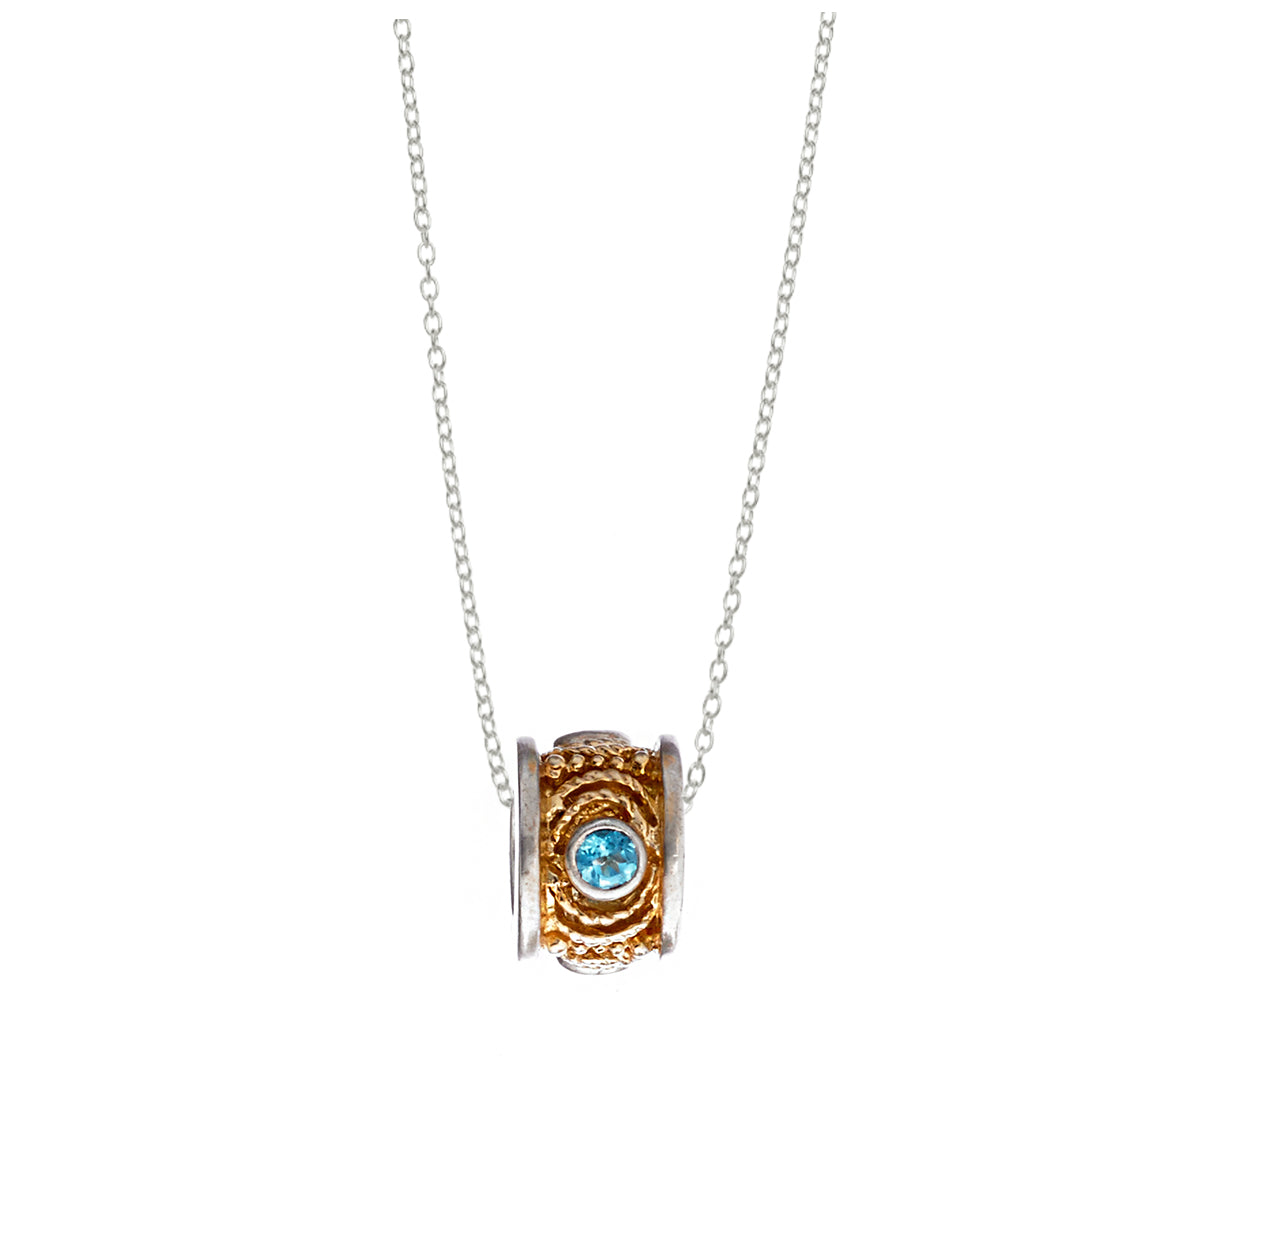 March Blue Topaz Sterling Silver with 14k Gold Vermeil Bead Necklace